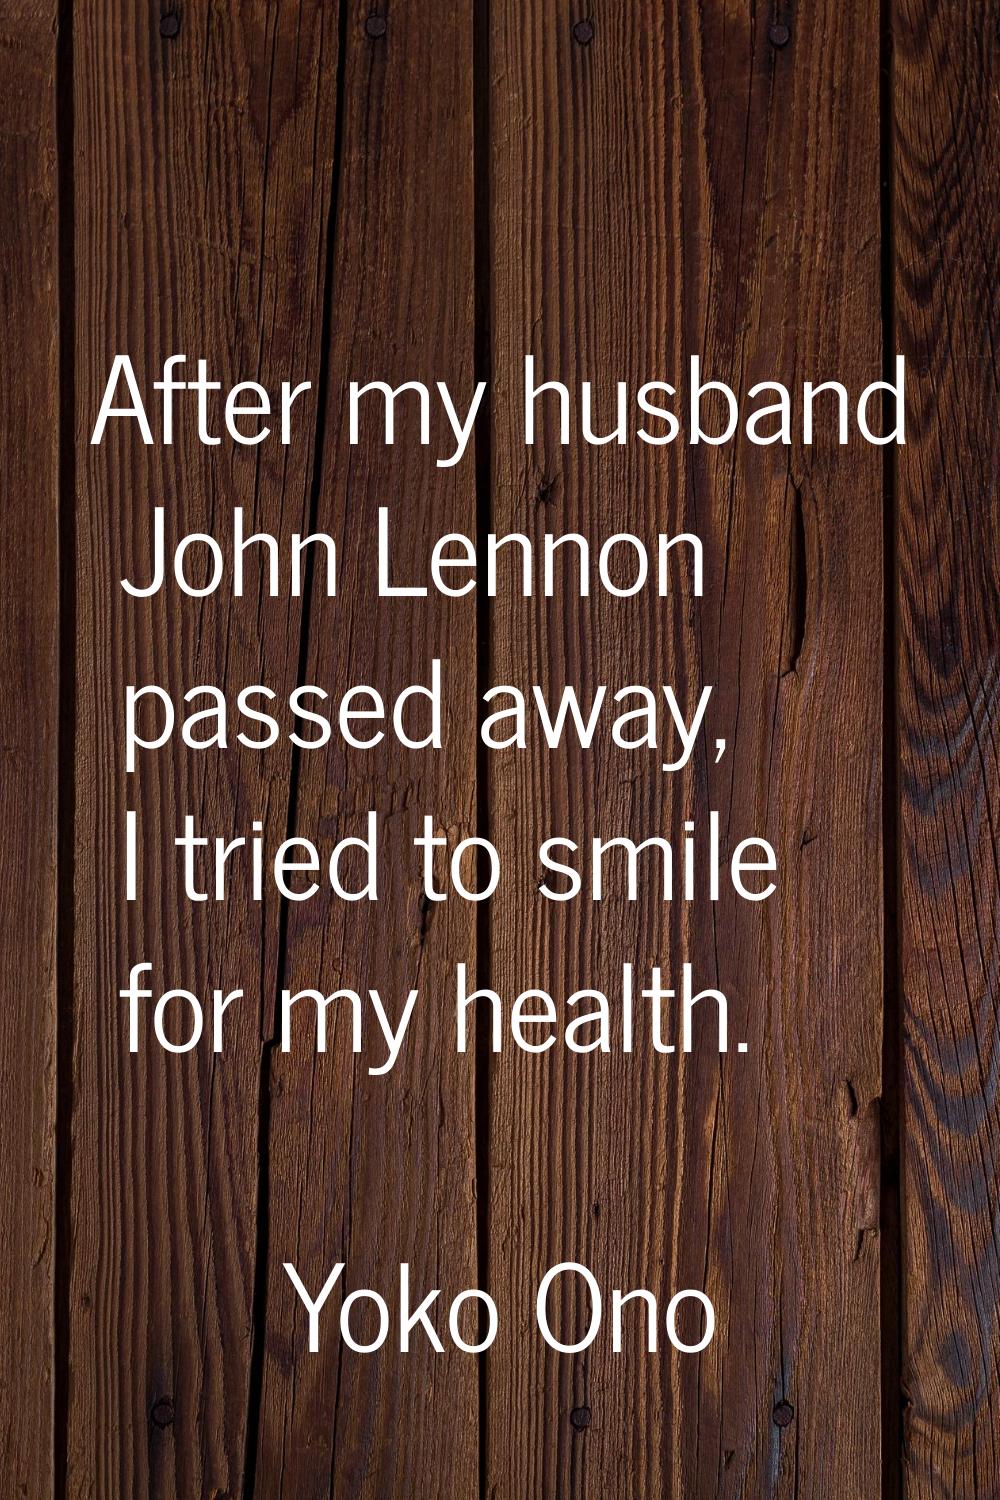 After my husband John Lennon passed away, I tried to smile for my health.